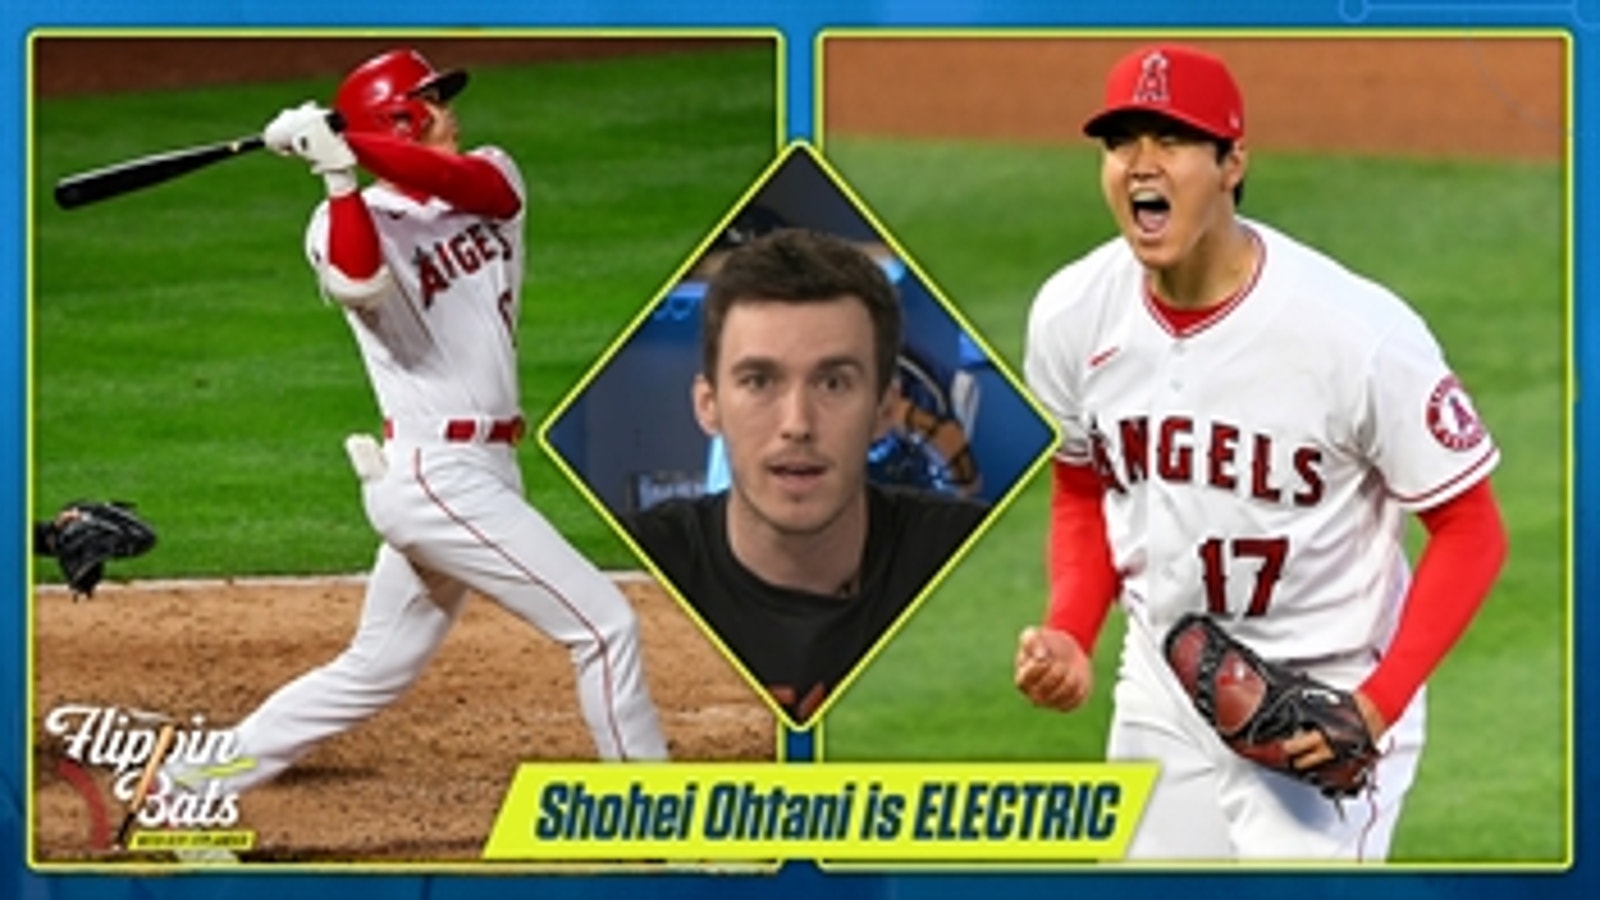 Ben explains why he believes Shohei Ohtani’s ability to pitch and hit at an elite level makes him the most exciting player in Major League Baseball in decades.